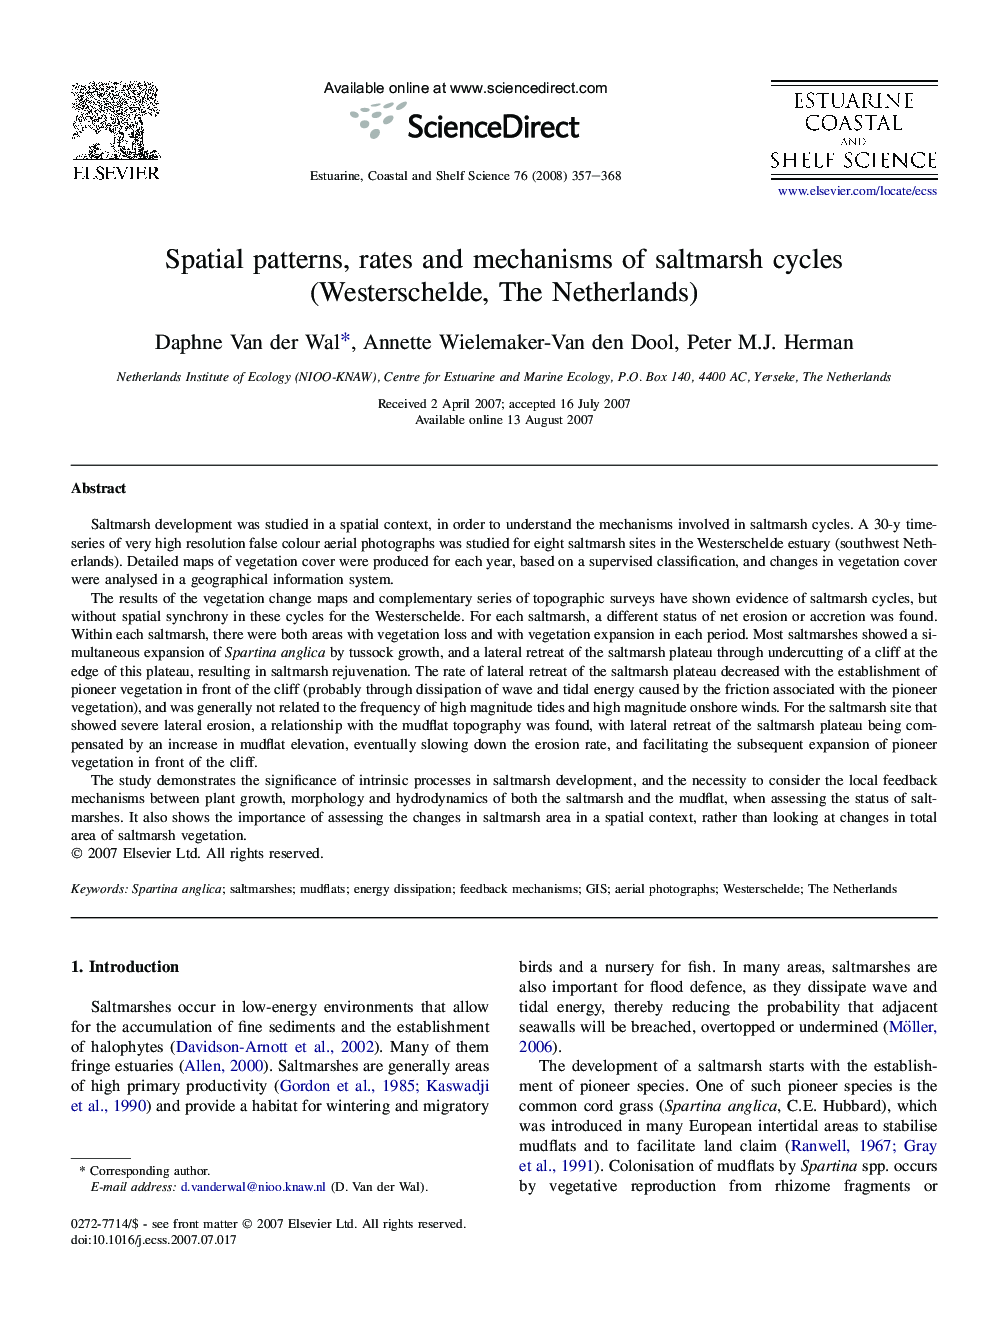 Spatial patterns, rates and mechanisms of saltmarsh cycles (Westerschelde, The Netherlands)